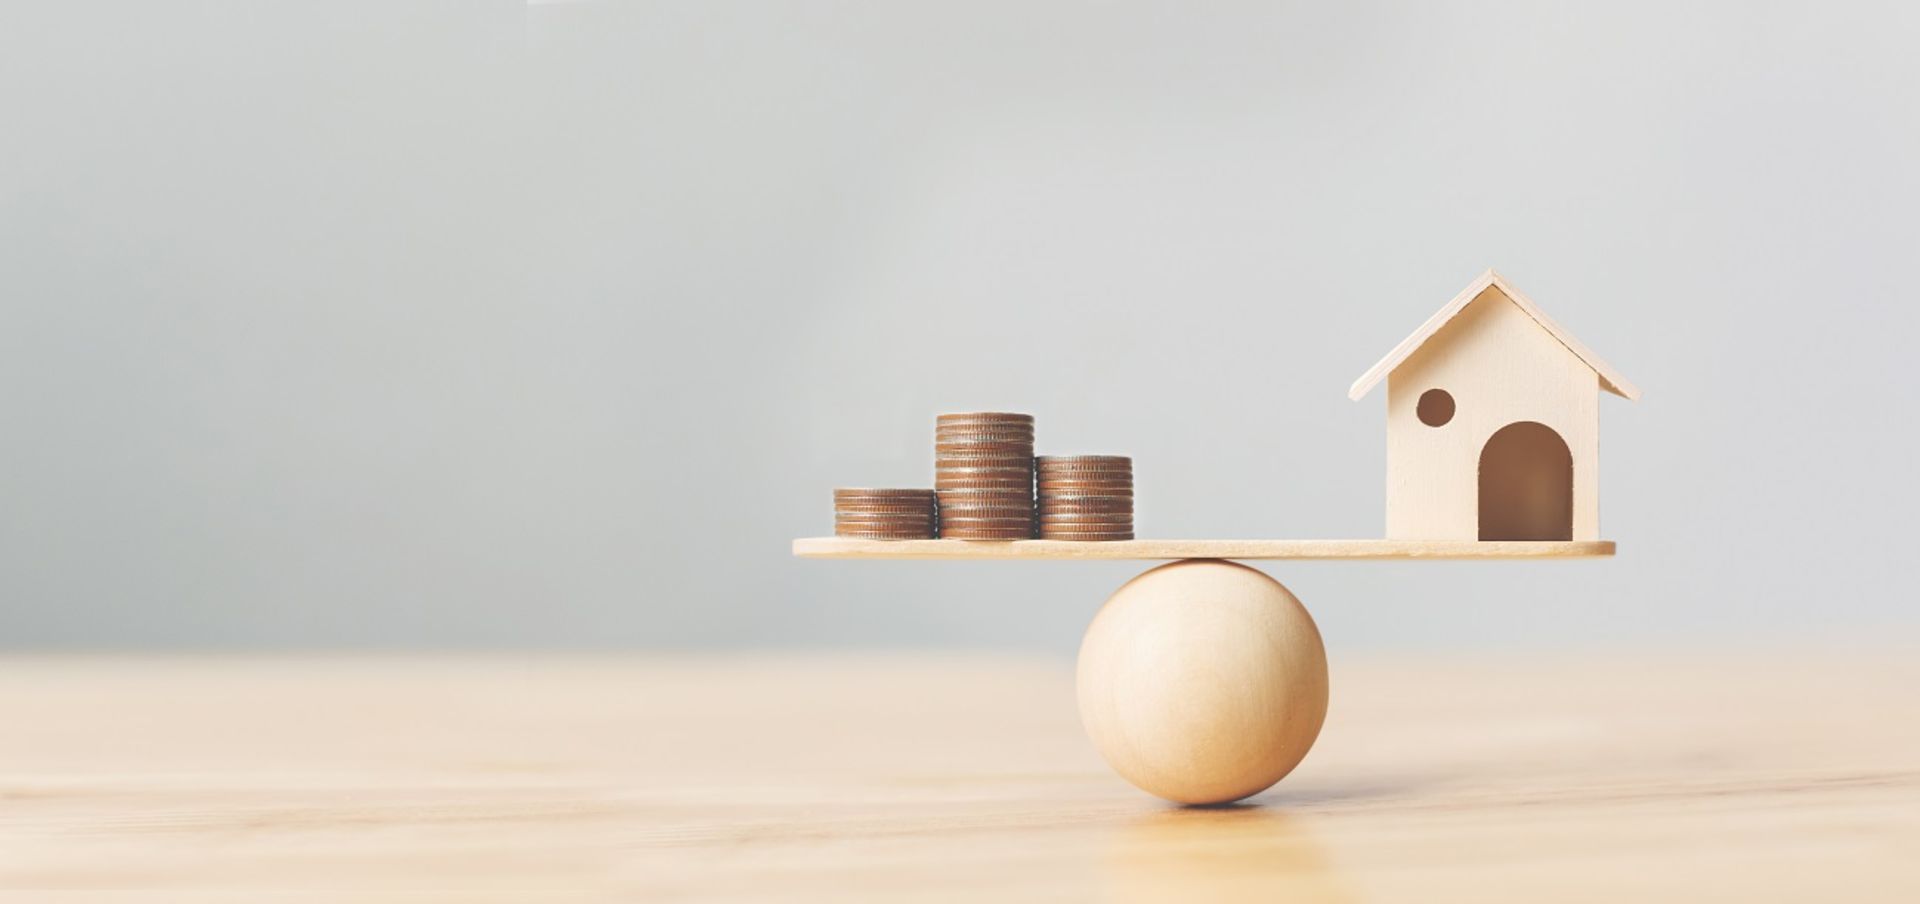 Are We Heading Into A More Balanced Real Estate Market?